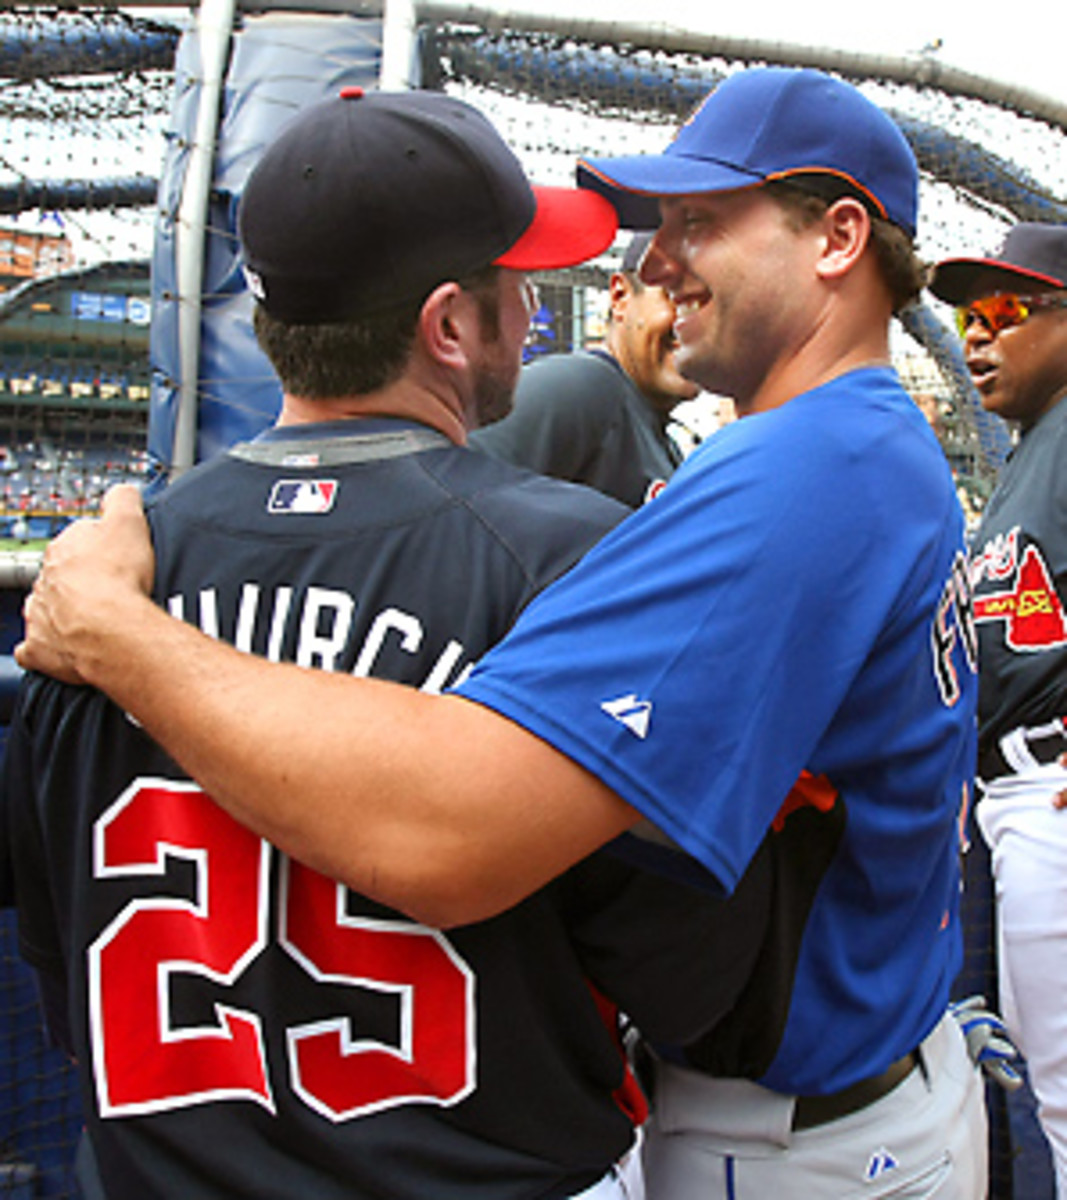 The native son returns: Jeff Francoeur signs deal with Braves